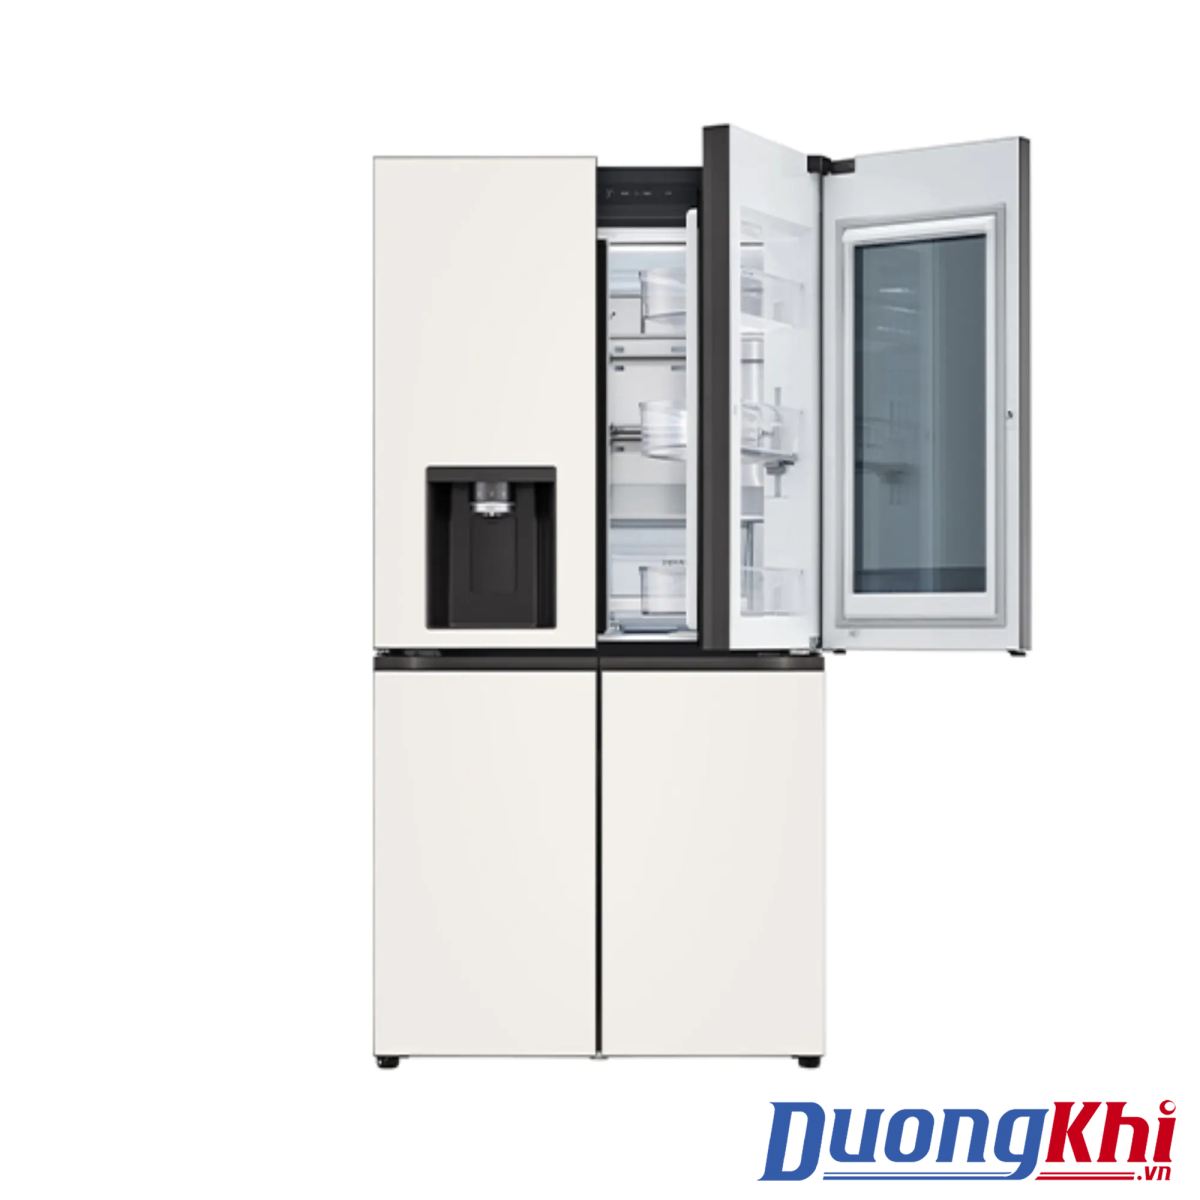 Tủ lạnh LG Dios Side by side màu be 820L 9